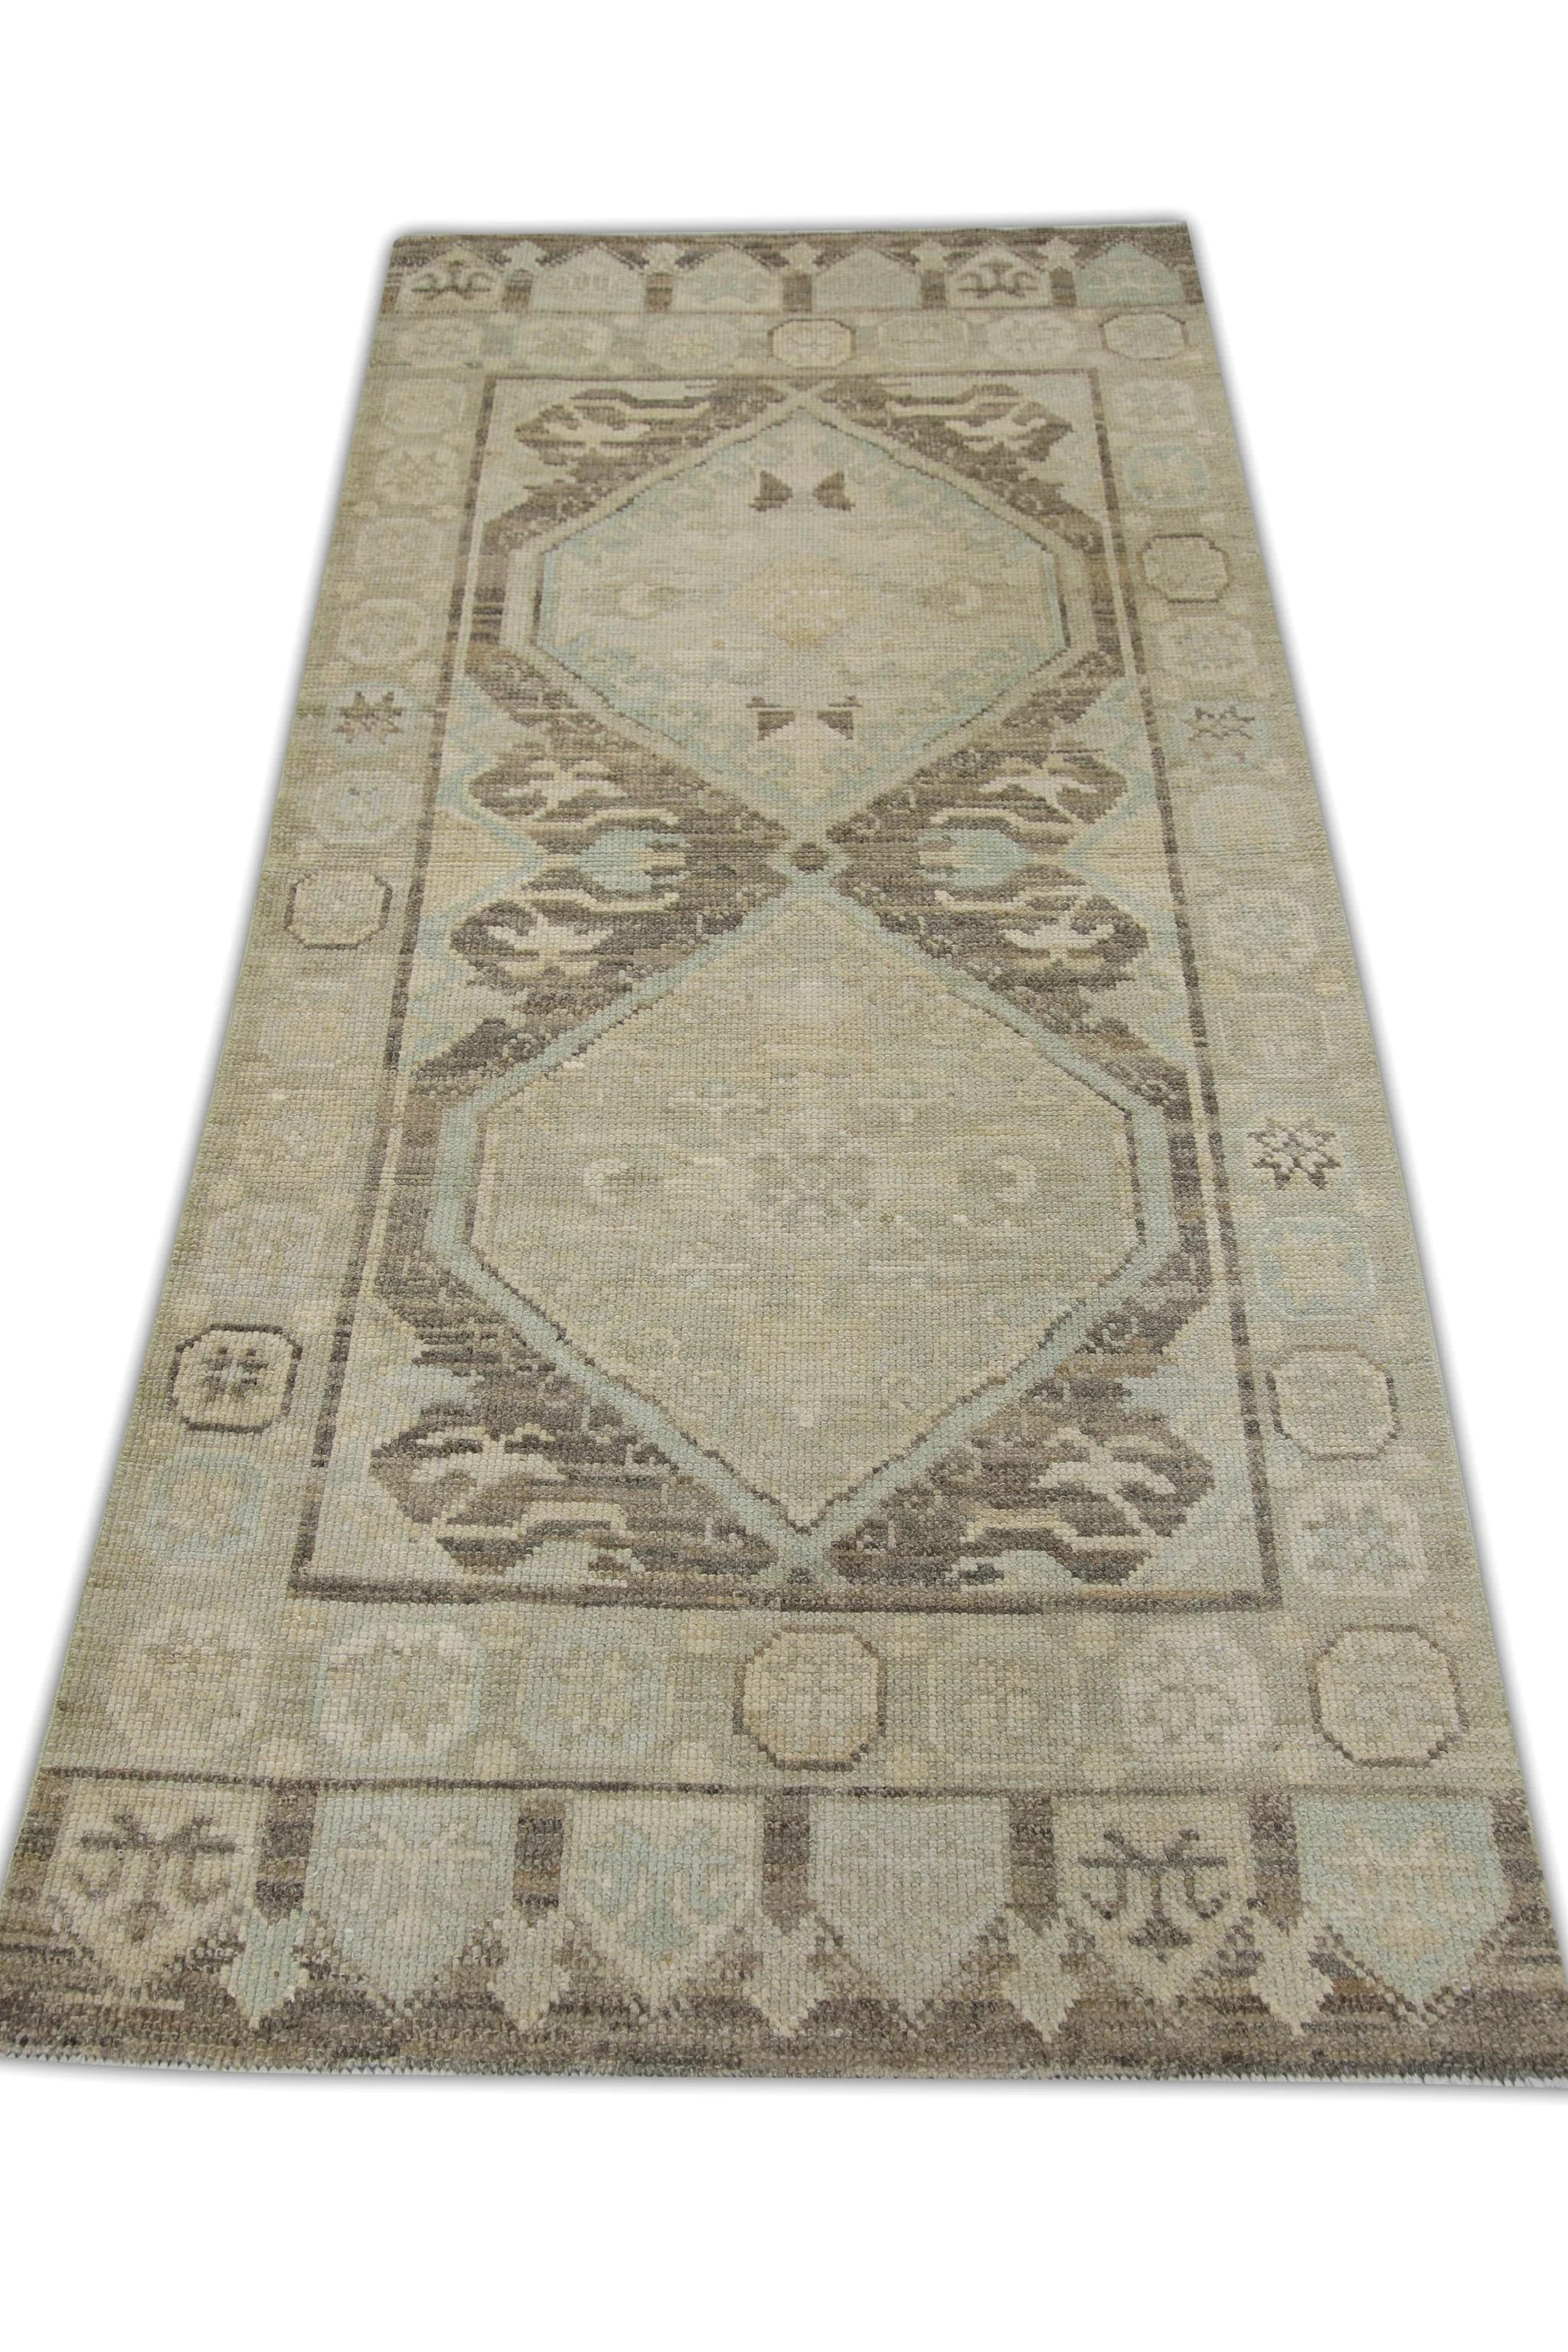 Contemporary Handwoven Wool Turkish Oushak Rug in Brown & Blue Medallion Design 3'1